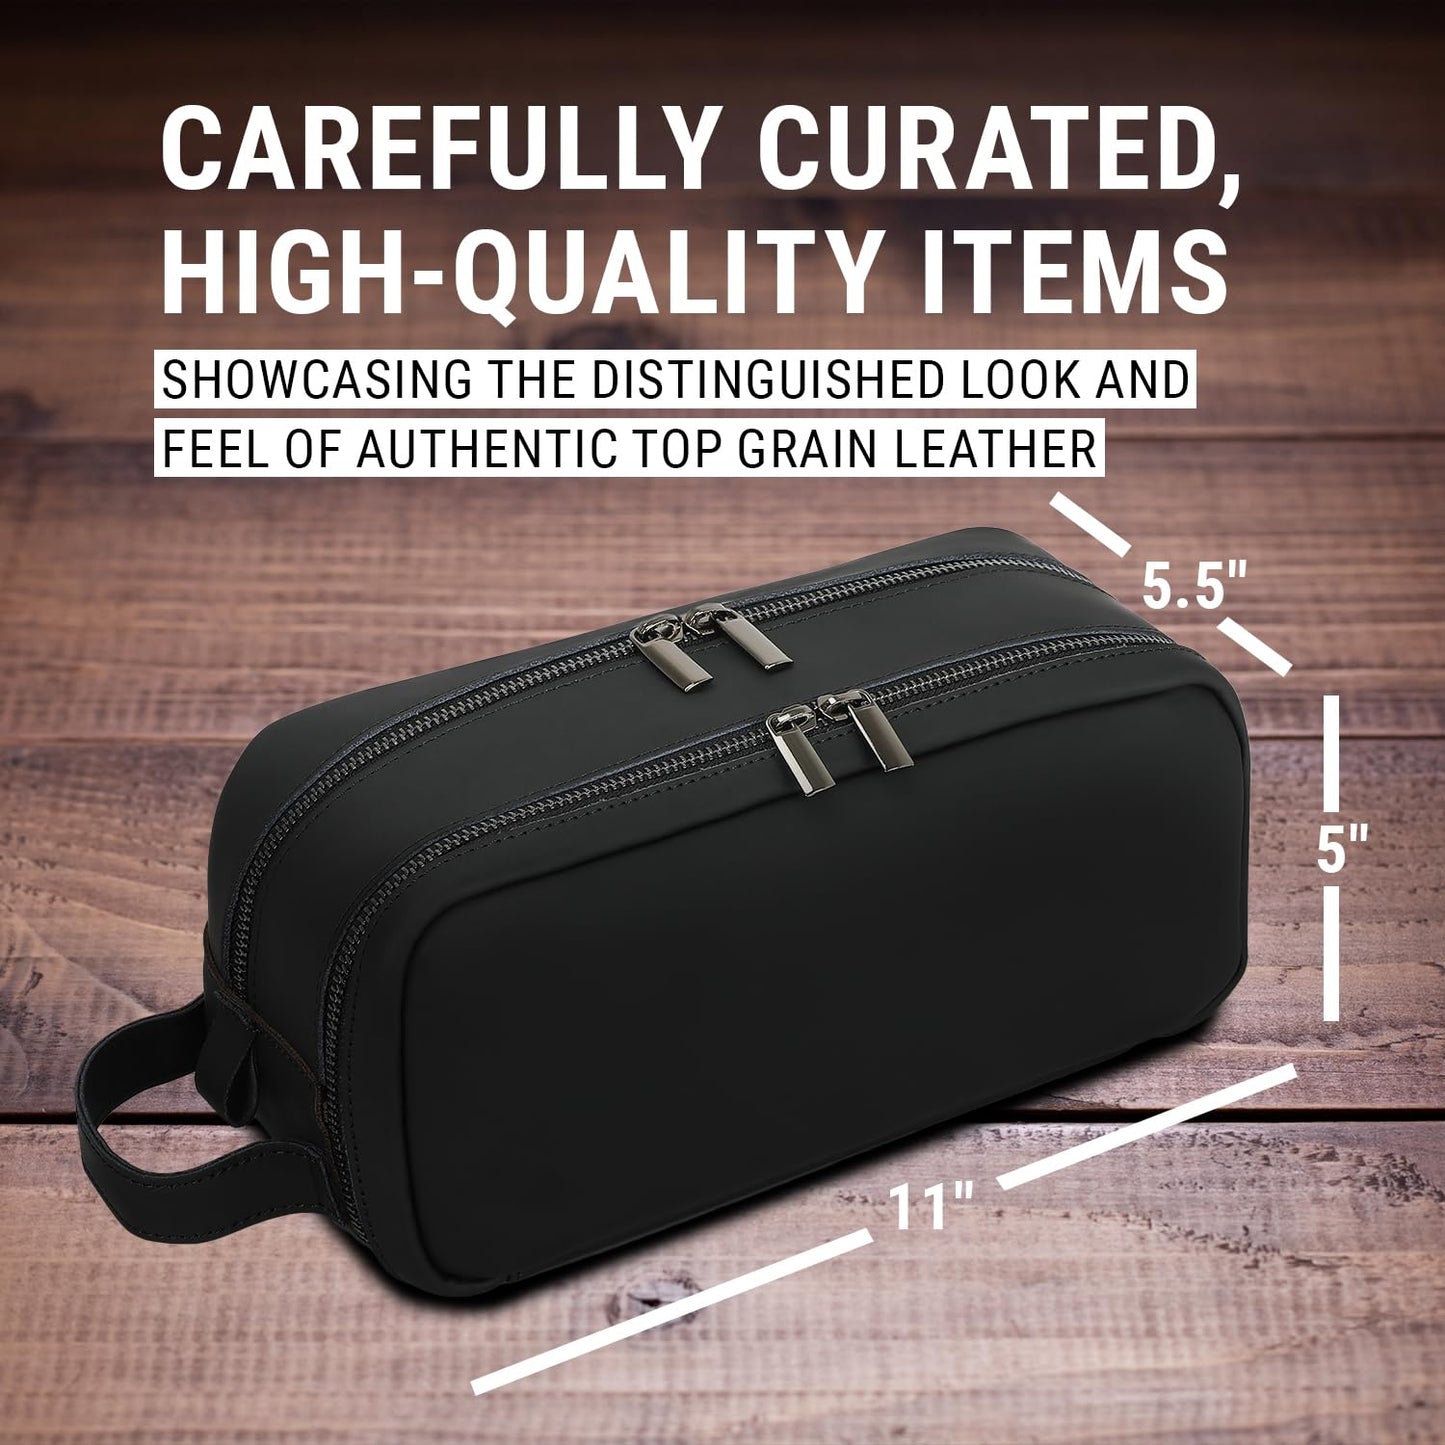 GUYTRENDz Top Grain Leather Dopp Kit/Toiletry Organizer - Leather Toiletry Travel Bag for Men - Featuring Organizer Compartment, Black